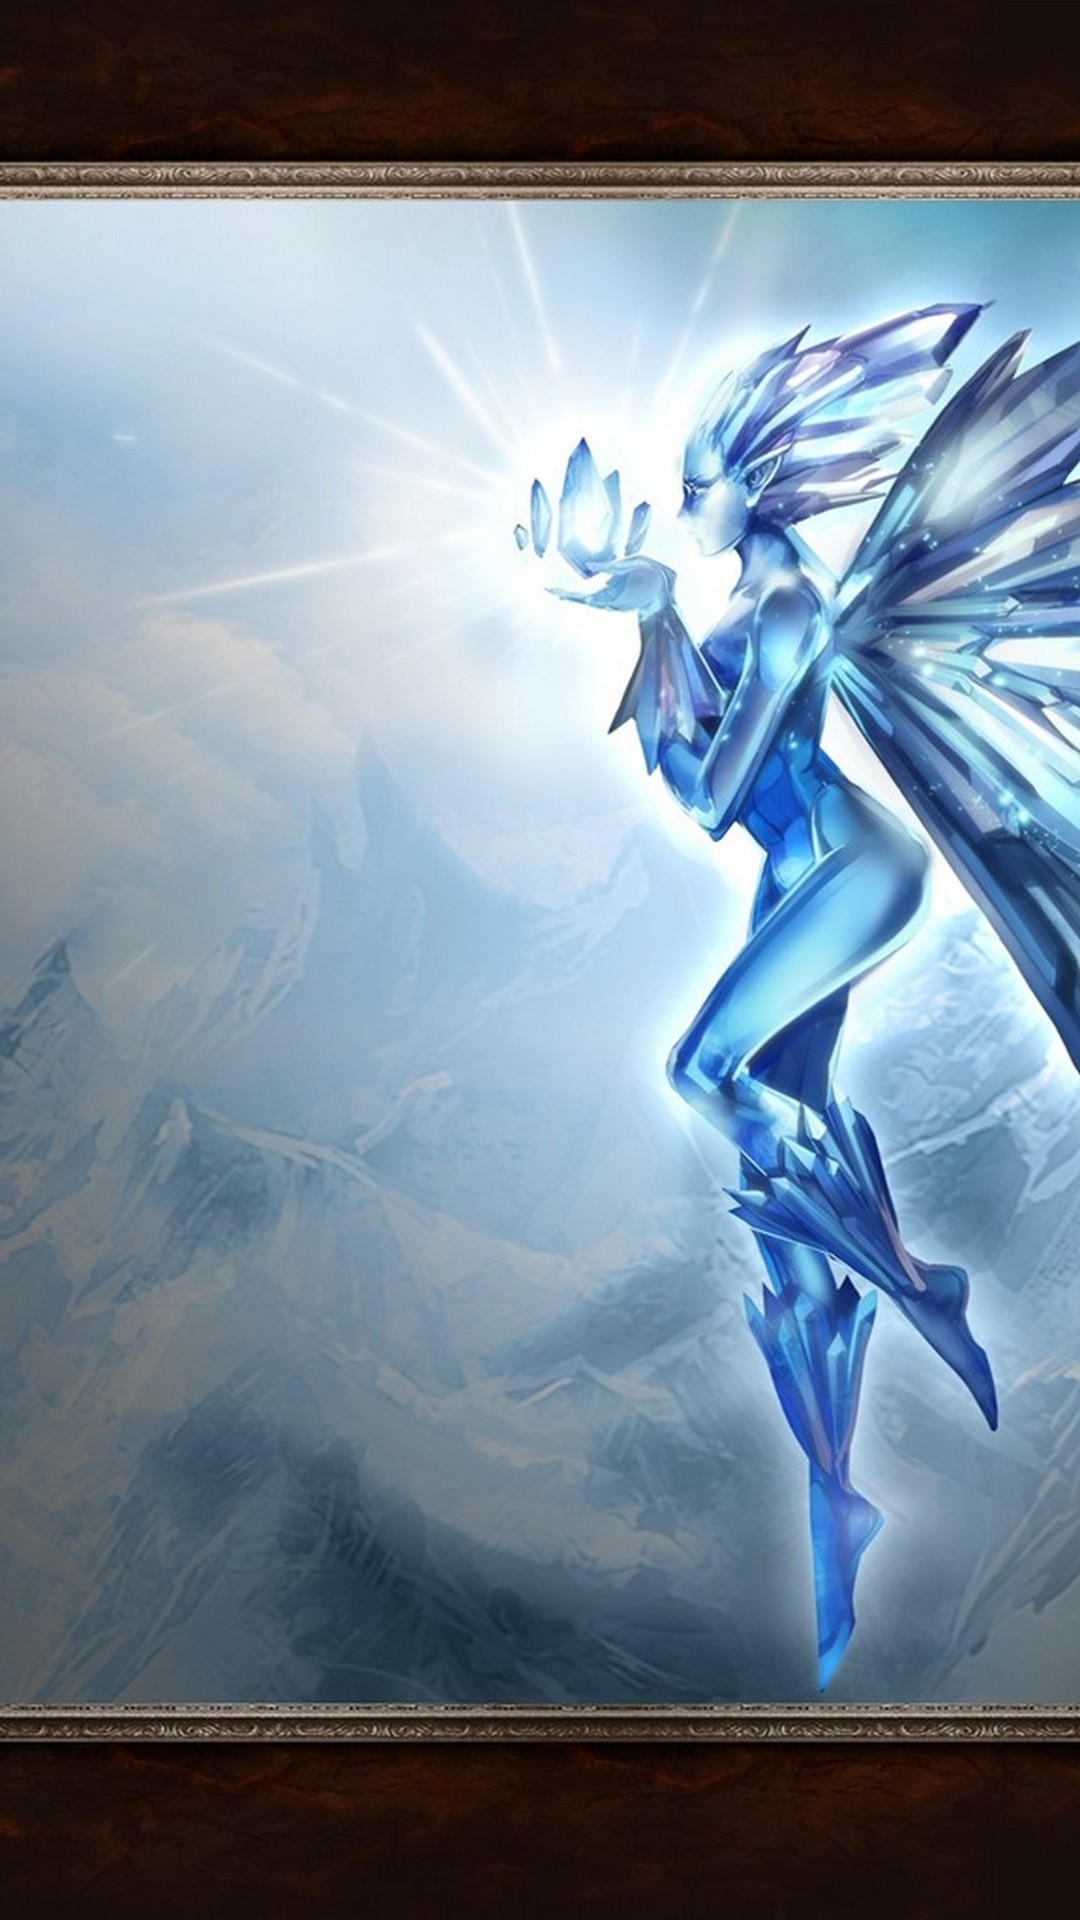 iPhone Wallpaper Ice Phoenix with resolution 1080X1920 pixel. You can make this wallpaper for your iPhone 5, 6, 7, 8, X backgrounds, Mobile Screensaver, or iPad Lock Screen